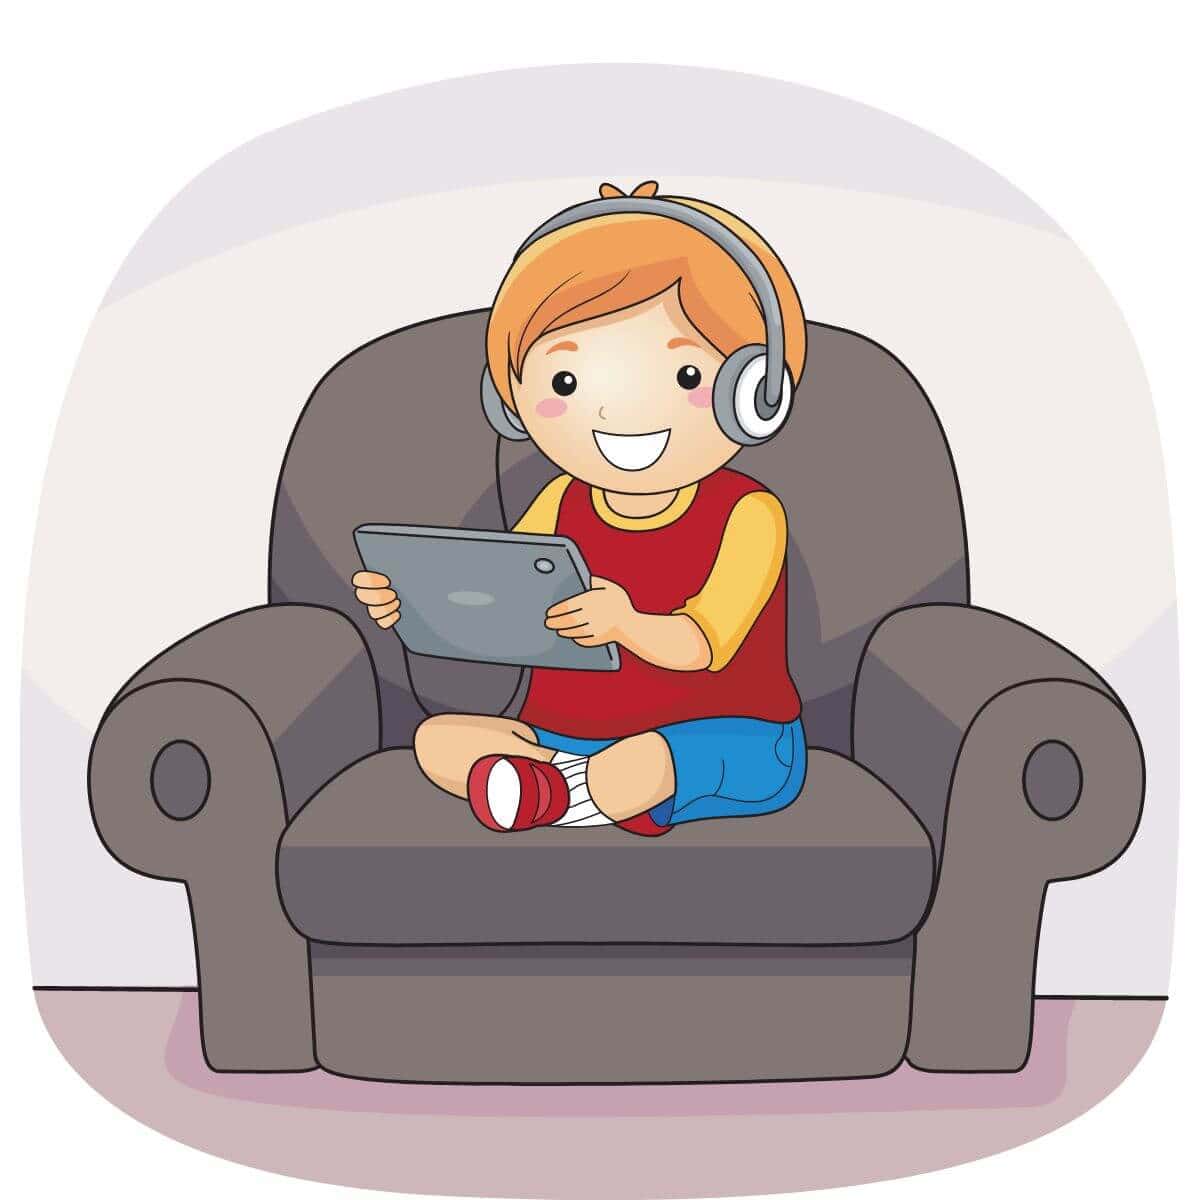 A square graphic image of a young boy with orange hair smiling while sitting on a gray easy chair watching a tablet and wearing headphones